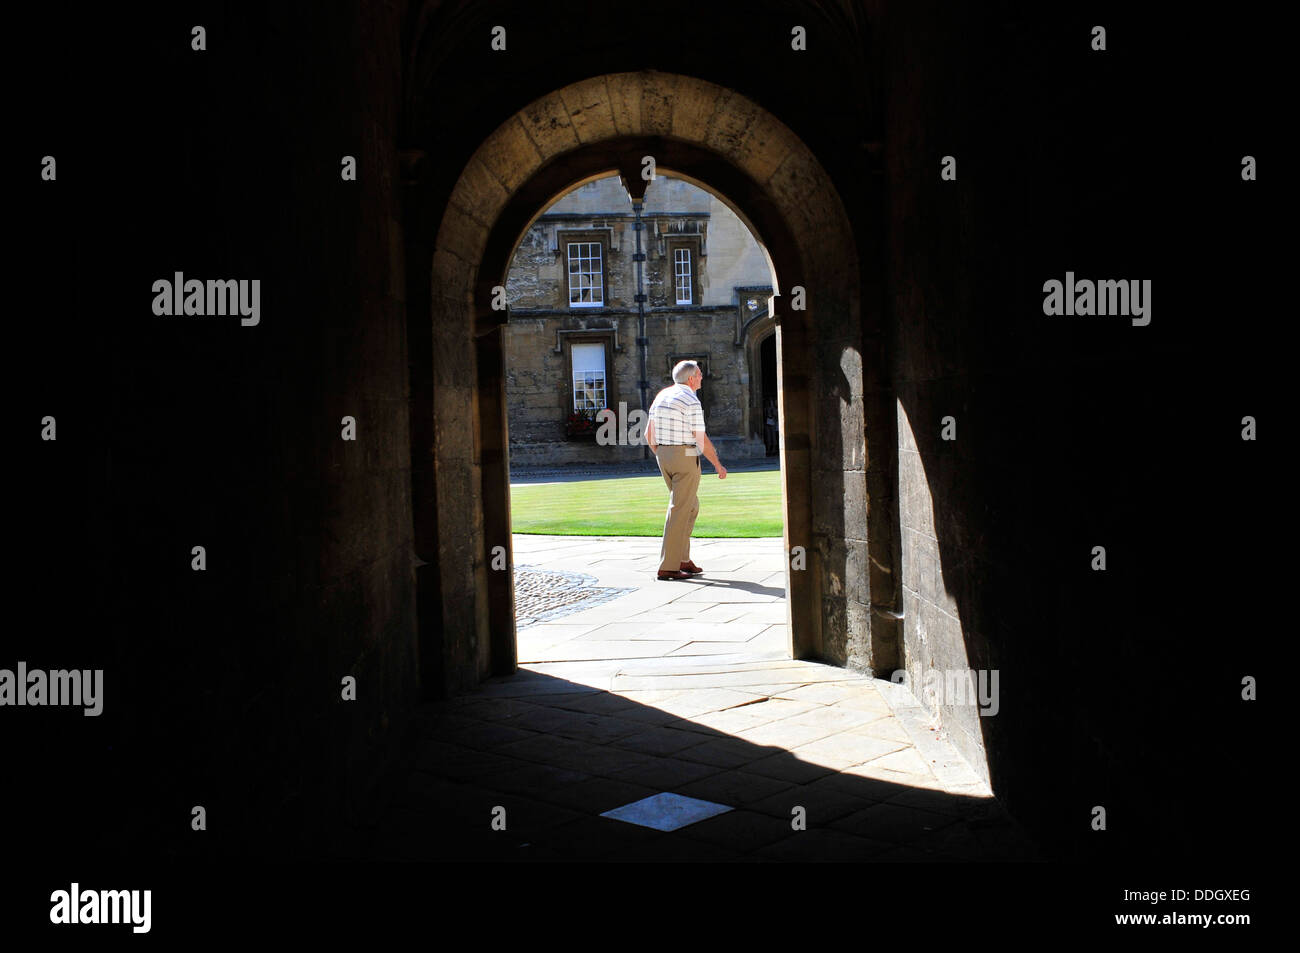 A view of a man through an arch, Oxford University, UK Stock Photo